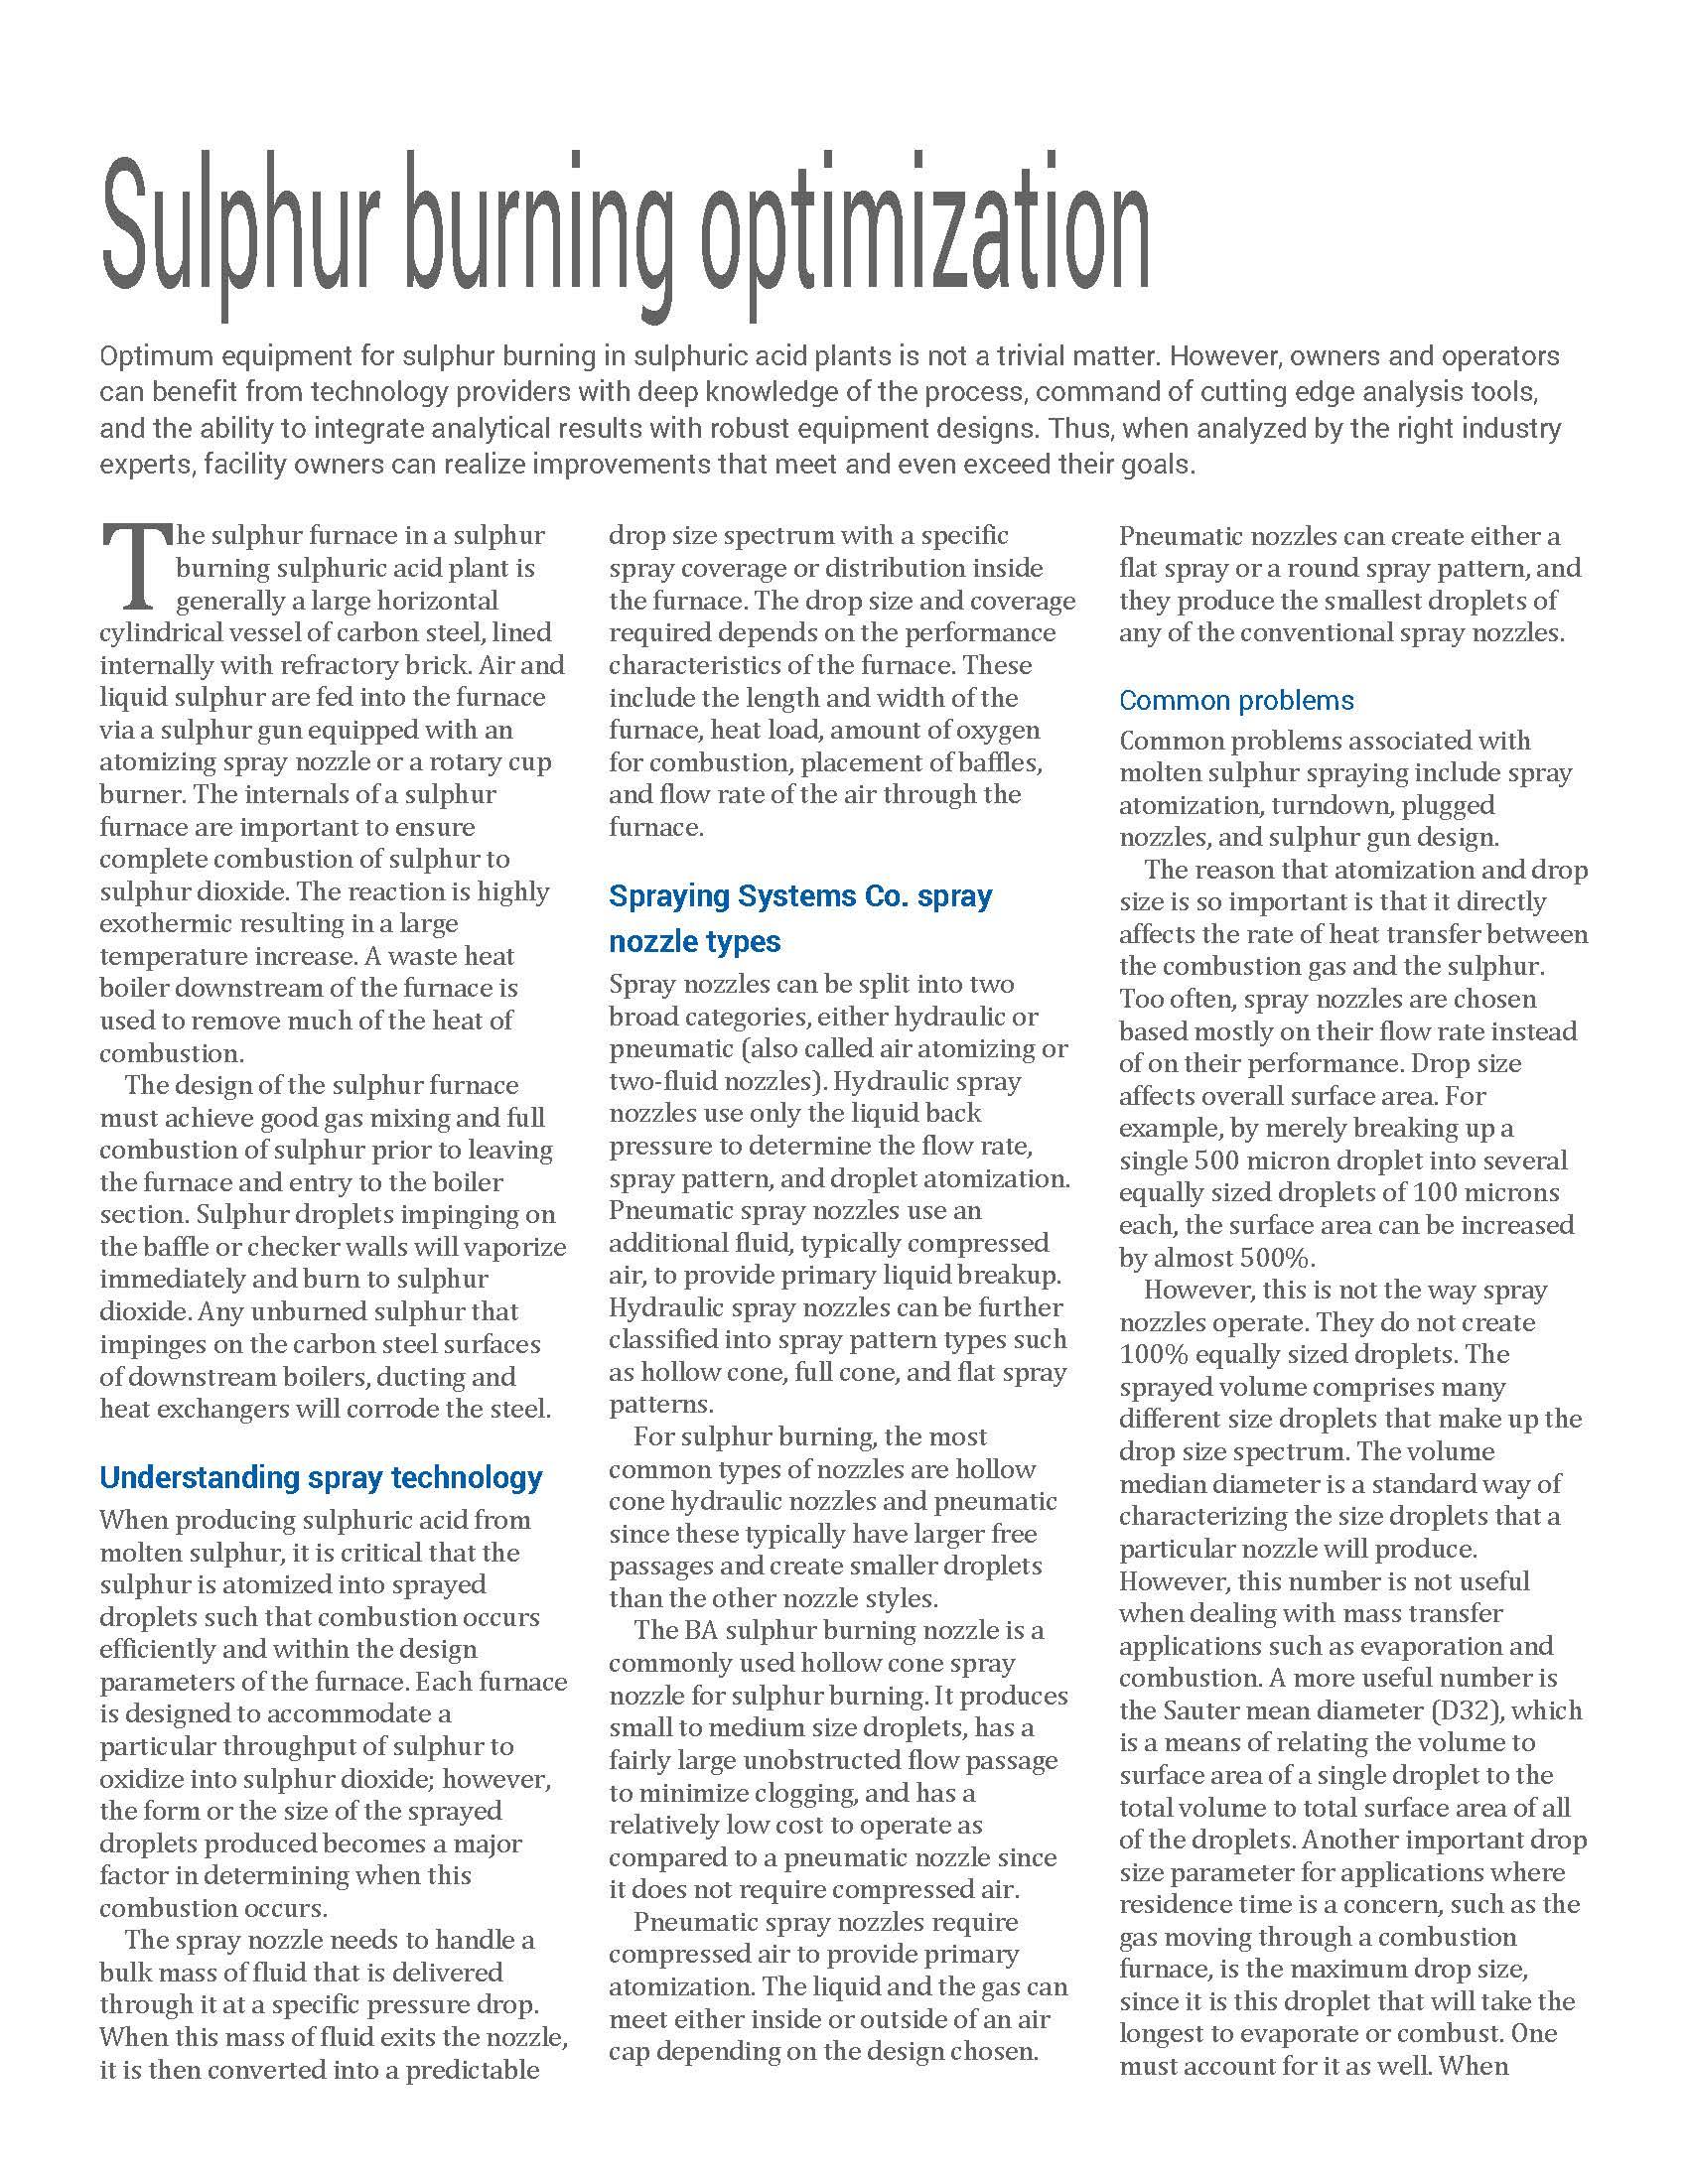 First page of "Sulphur burning optimization" white paper.